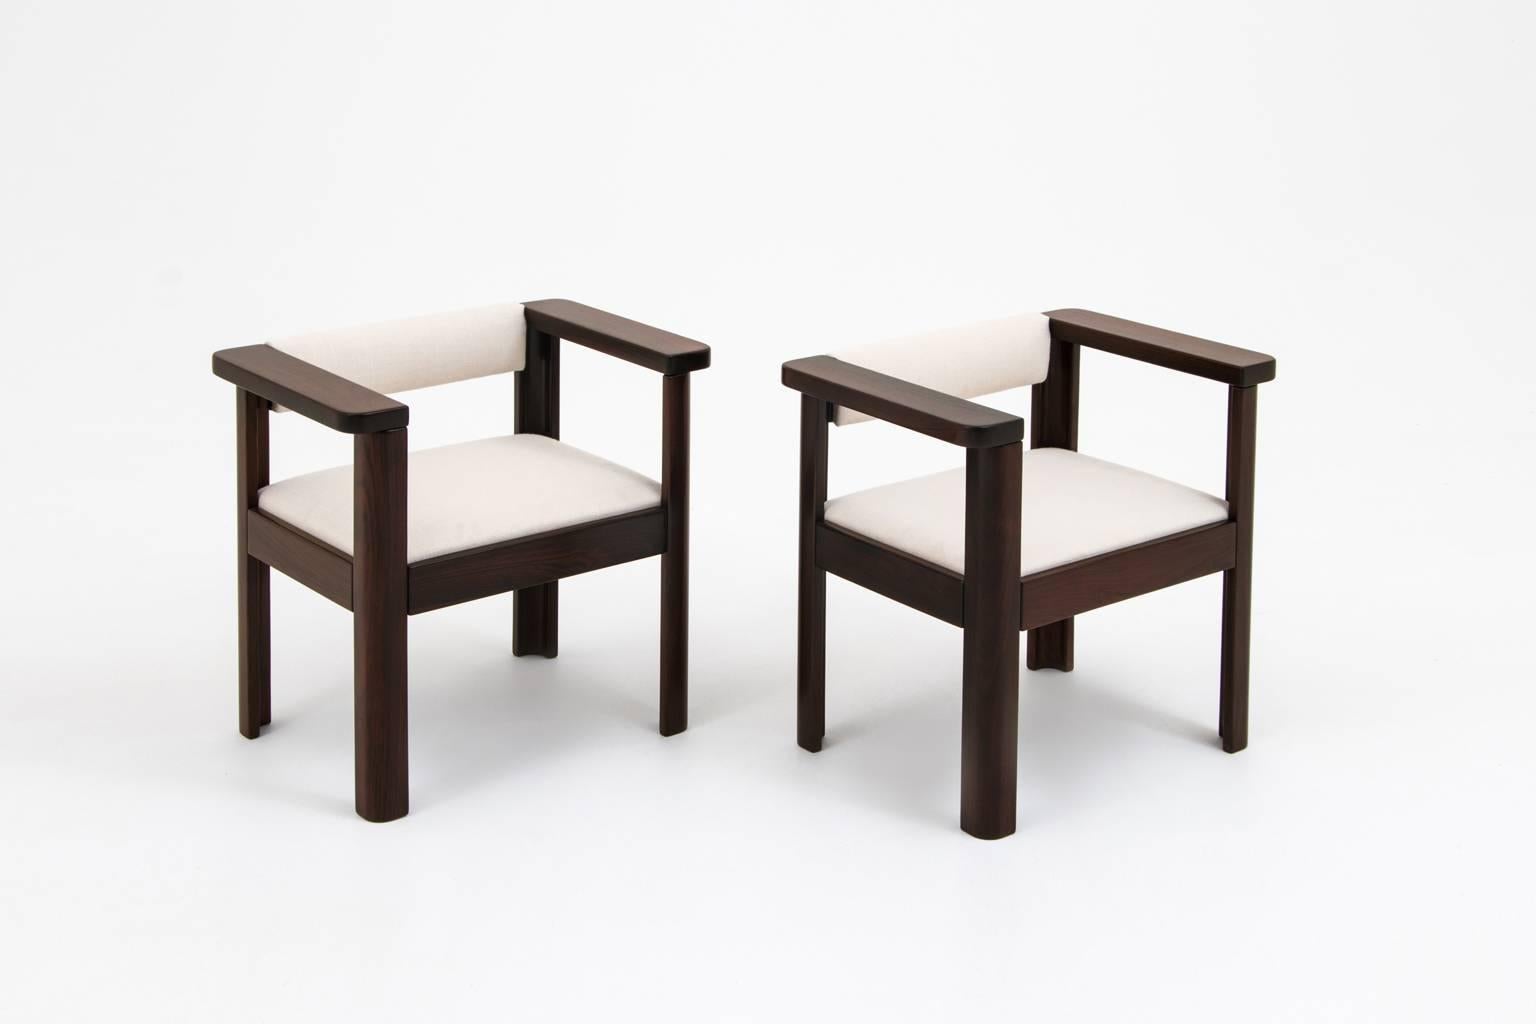 Pair of armchairs mod. ‘Idlor’ by Angelo Mangiarotti for Lorenzon, Italy 1960’s. 
Strong sculptural design made out of solid Rosewood. Upholstered with a luxurious woven 100% natural fabric composed of Viscose (Rayon) and silk from the collection of